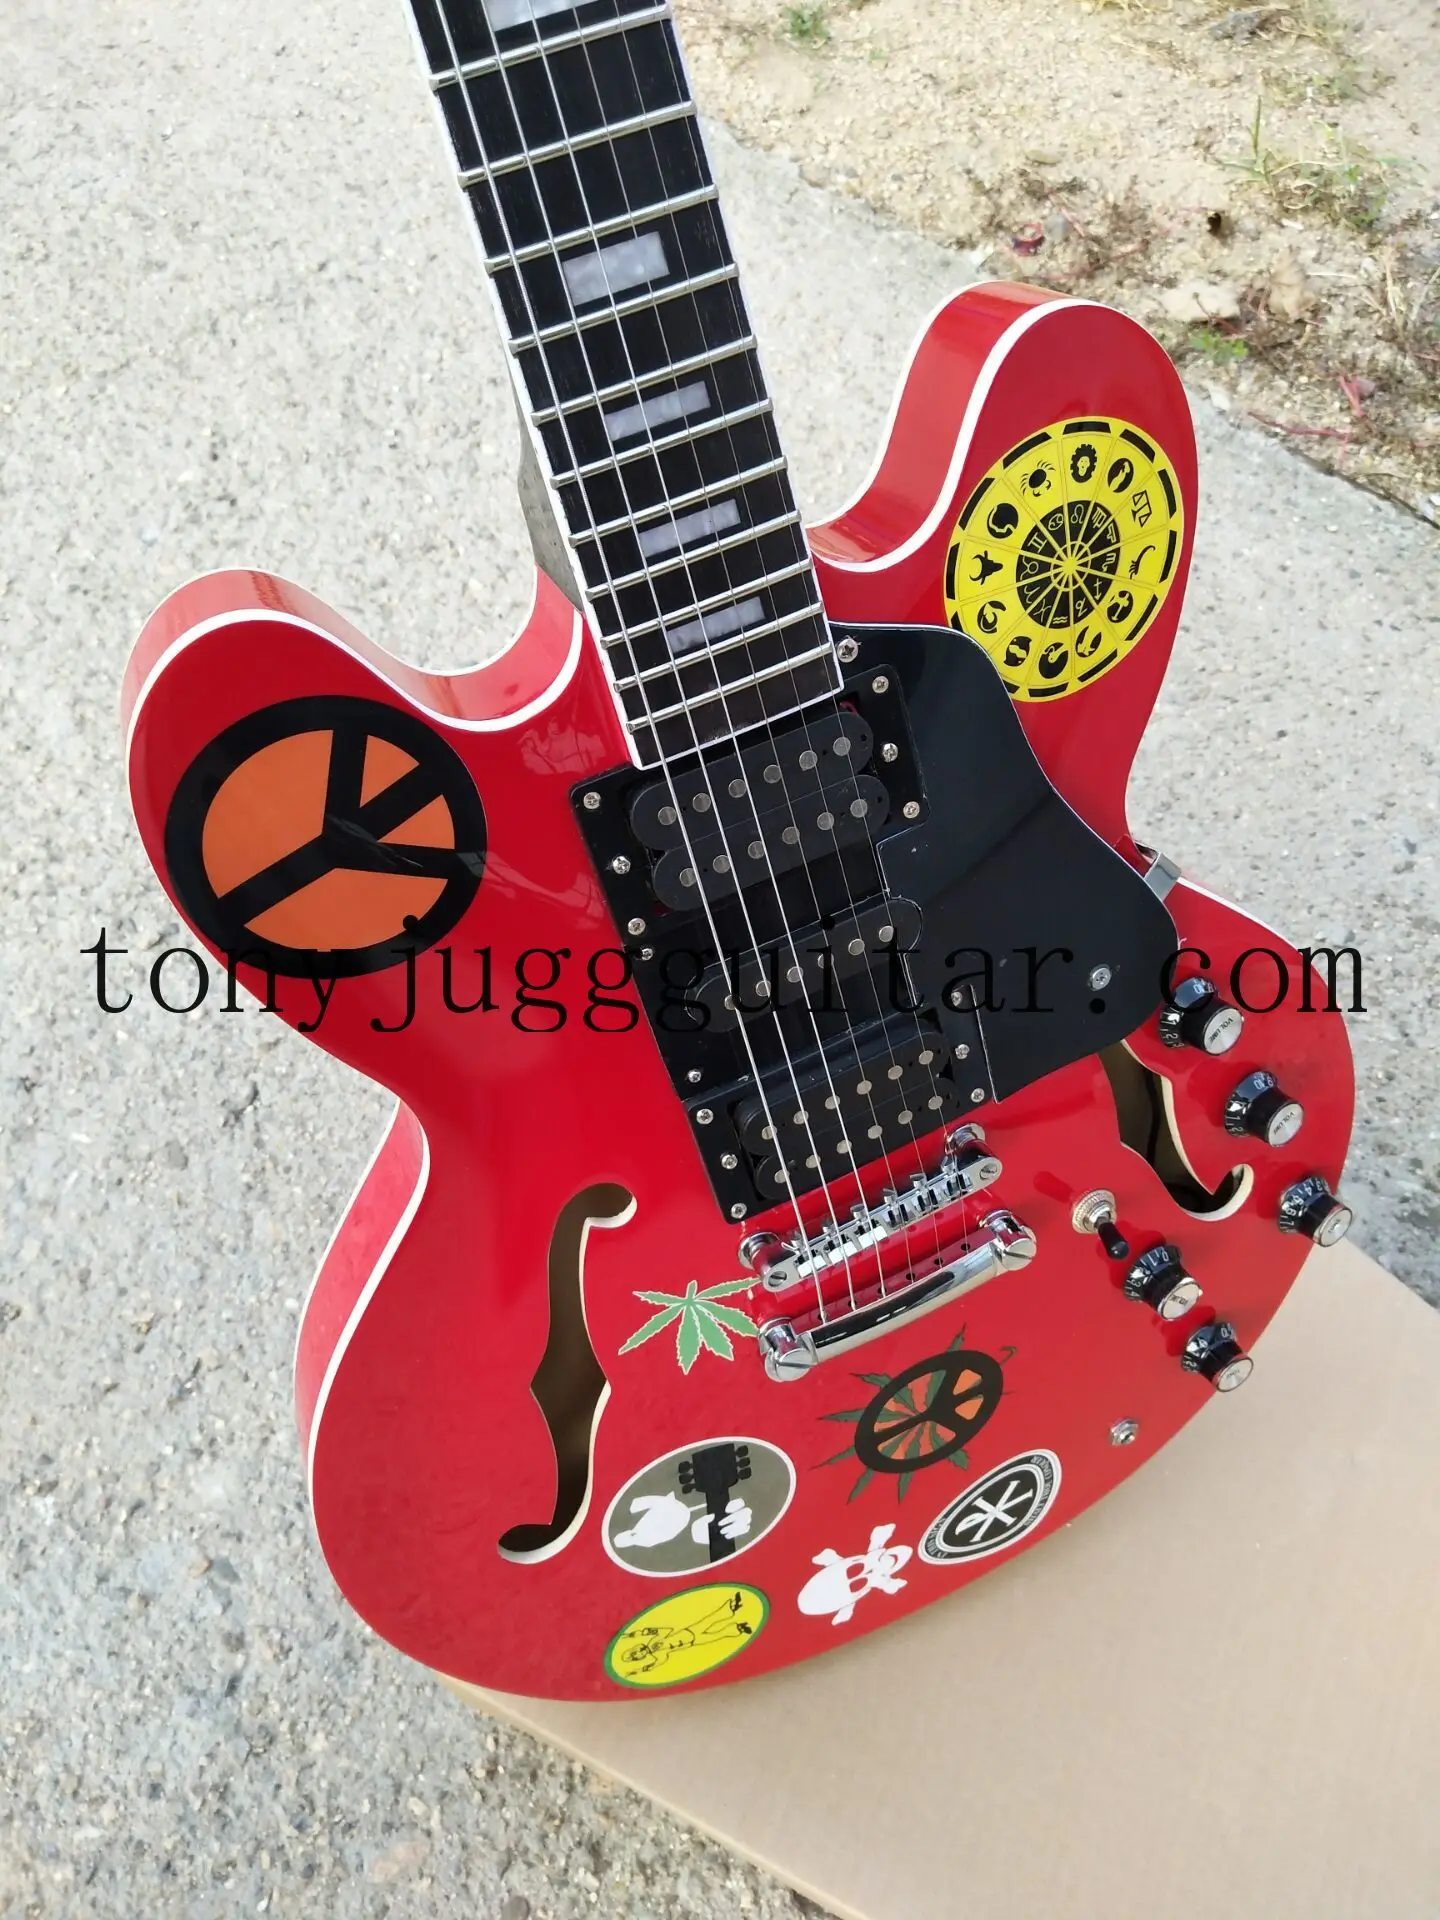 

Rhxflame Custom Shop Alvin Lee Semi Hollow Body Big Red 335 Jazz Guitar Multi Stickers Top, Small Block Inlay, 60s Neck, 5 Knobs